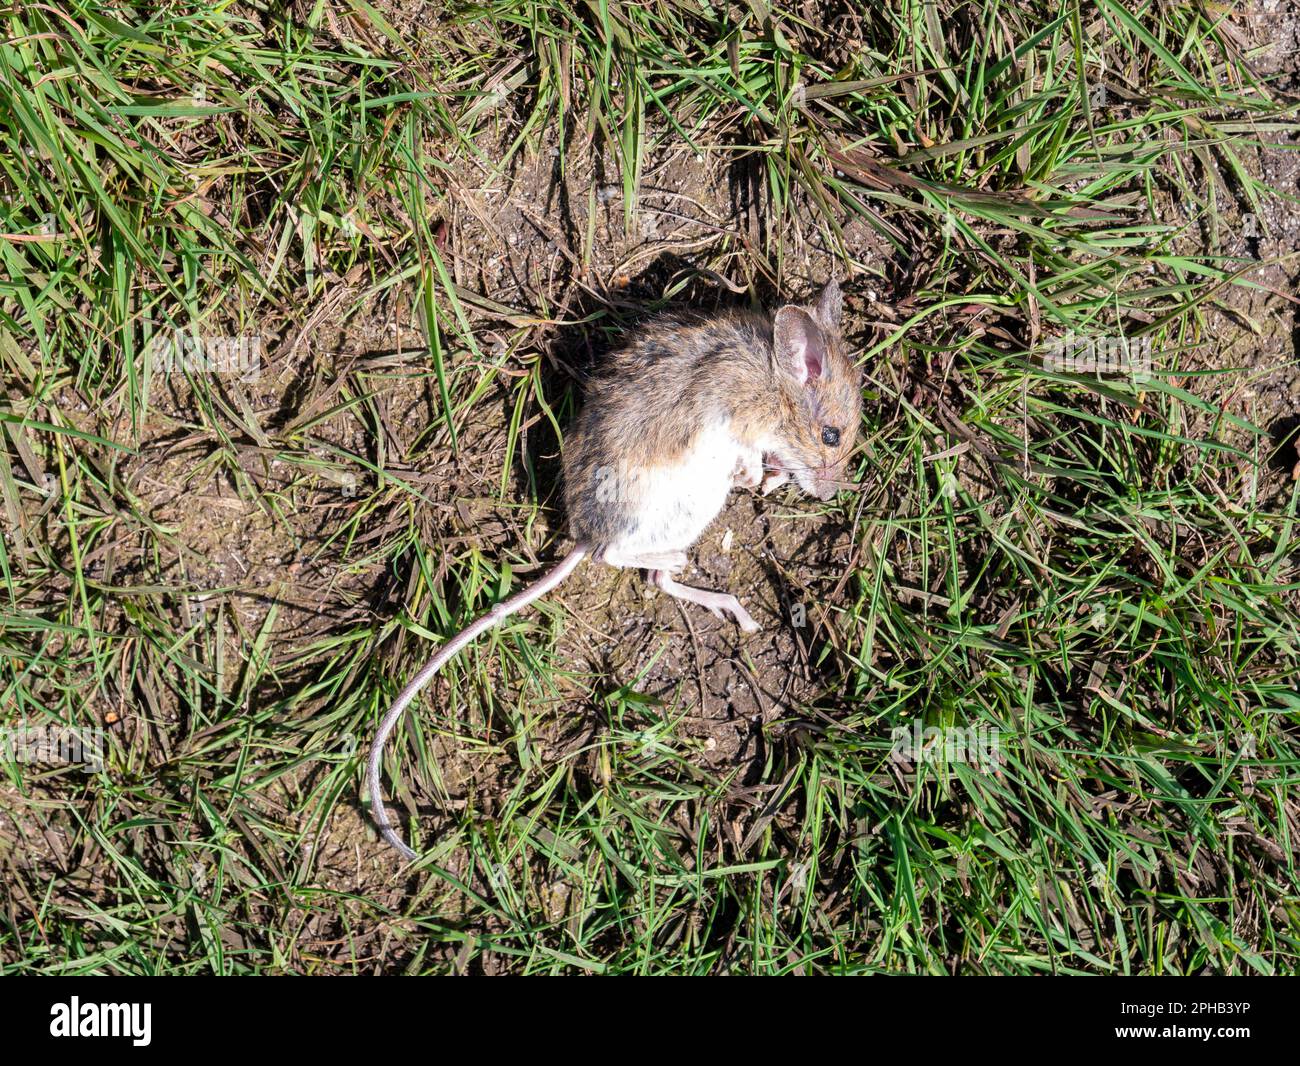 Wood mouse, Apodemus sylvaticus, lying dead on grass, Netherlands Stock Photo